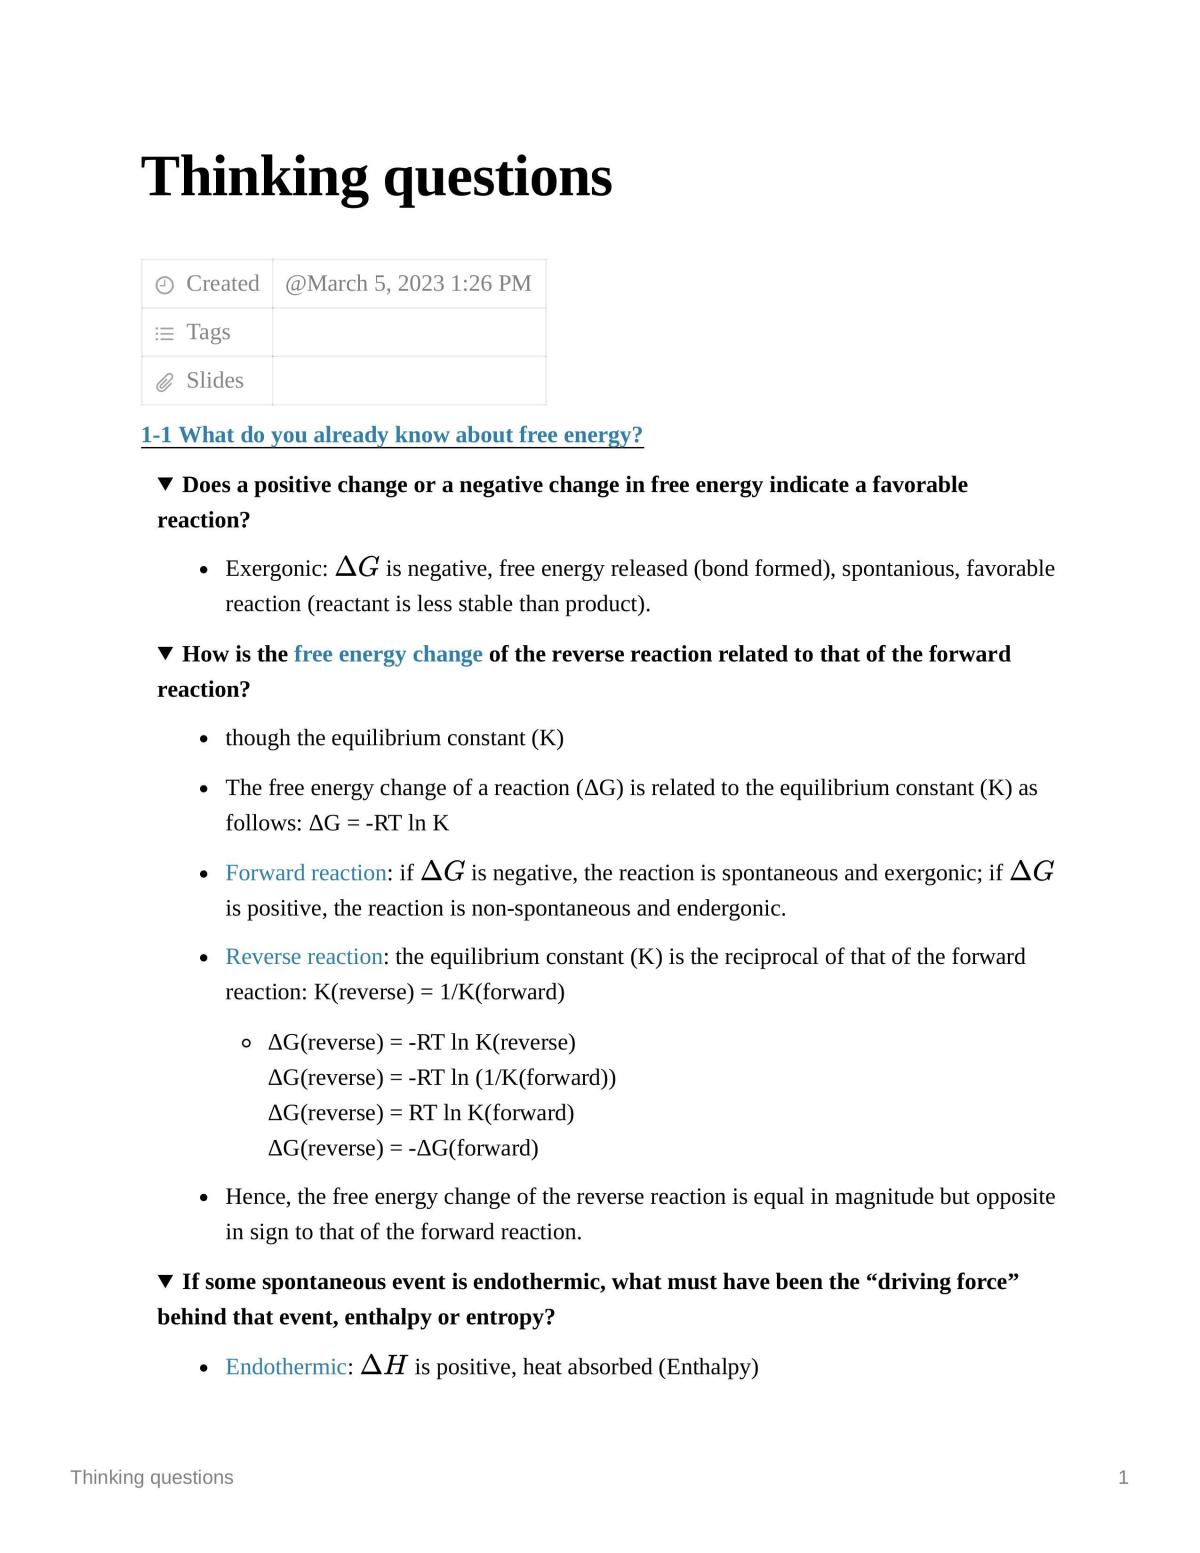 Module 1 topic notes with thinking questions - Page 1